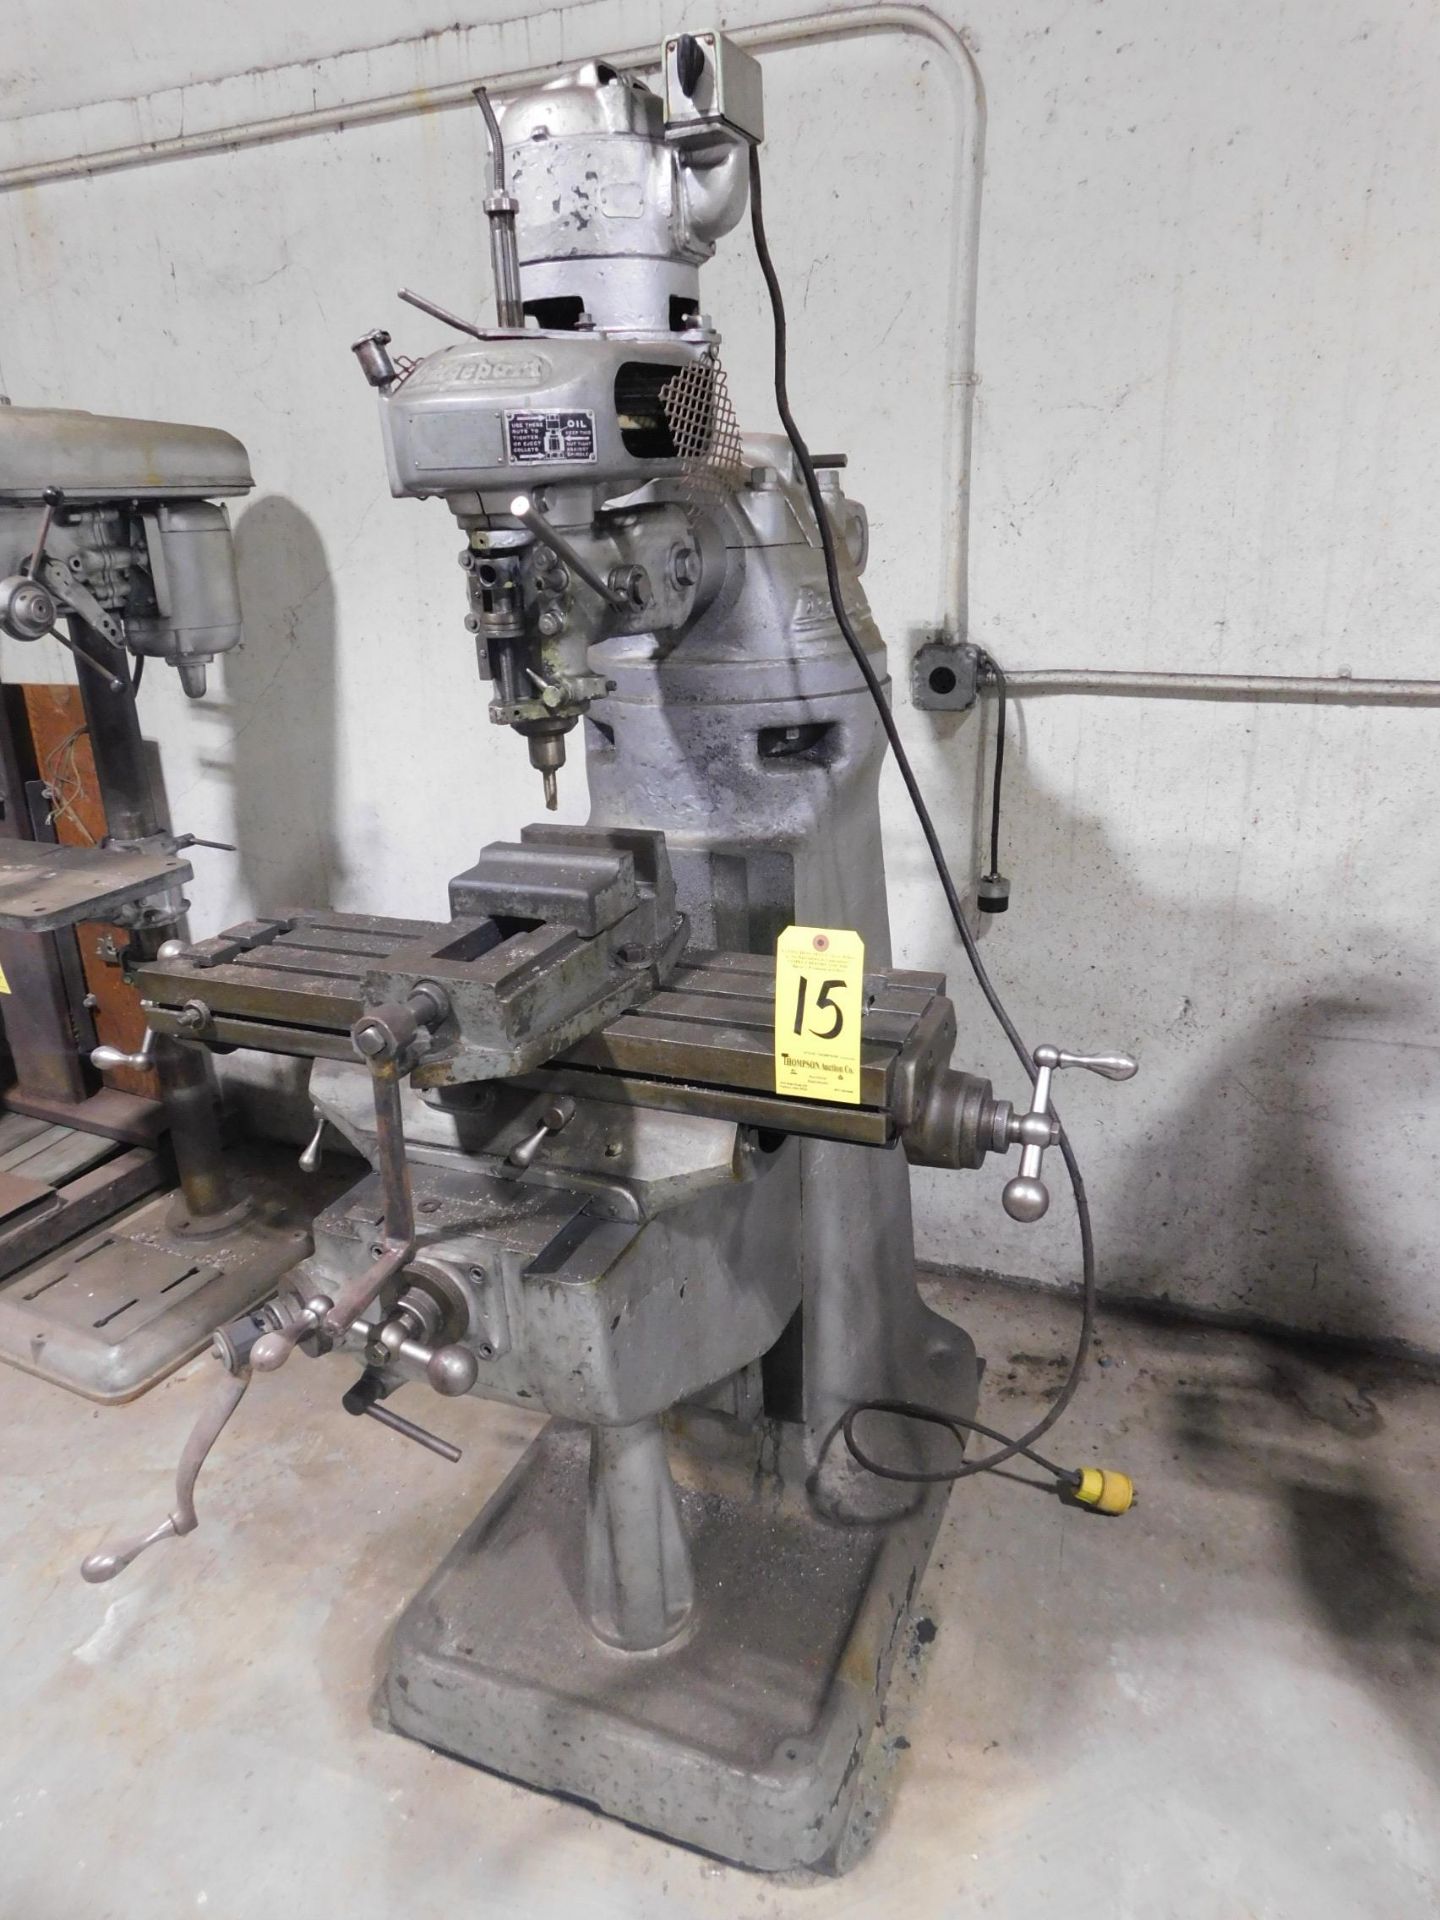 Bridgeport Round Overarm Vertical Mill, SN 11054, 9" x 32" Table, "M" Head, 2 MT Spindle, 6" Mill